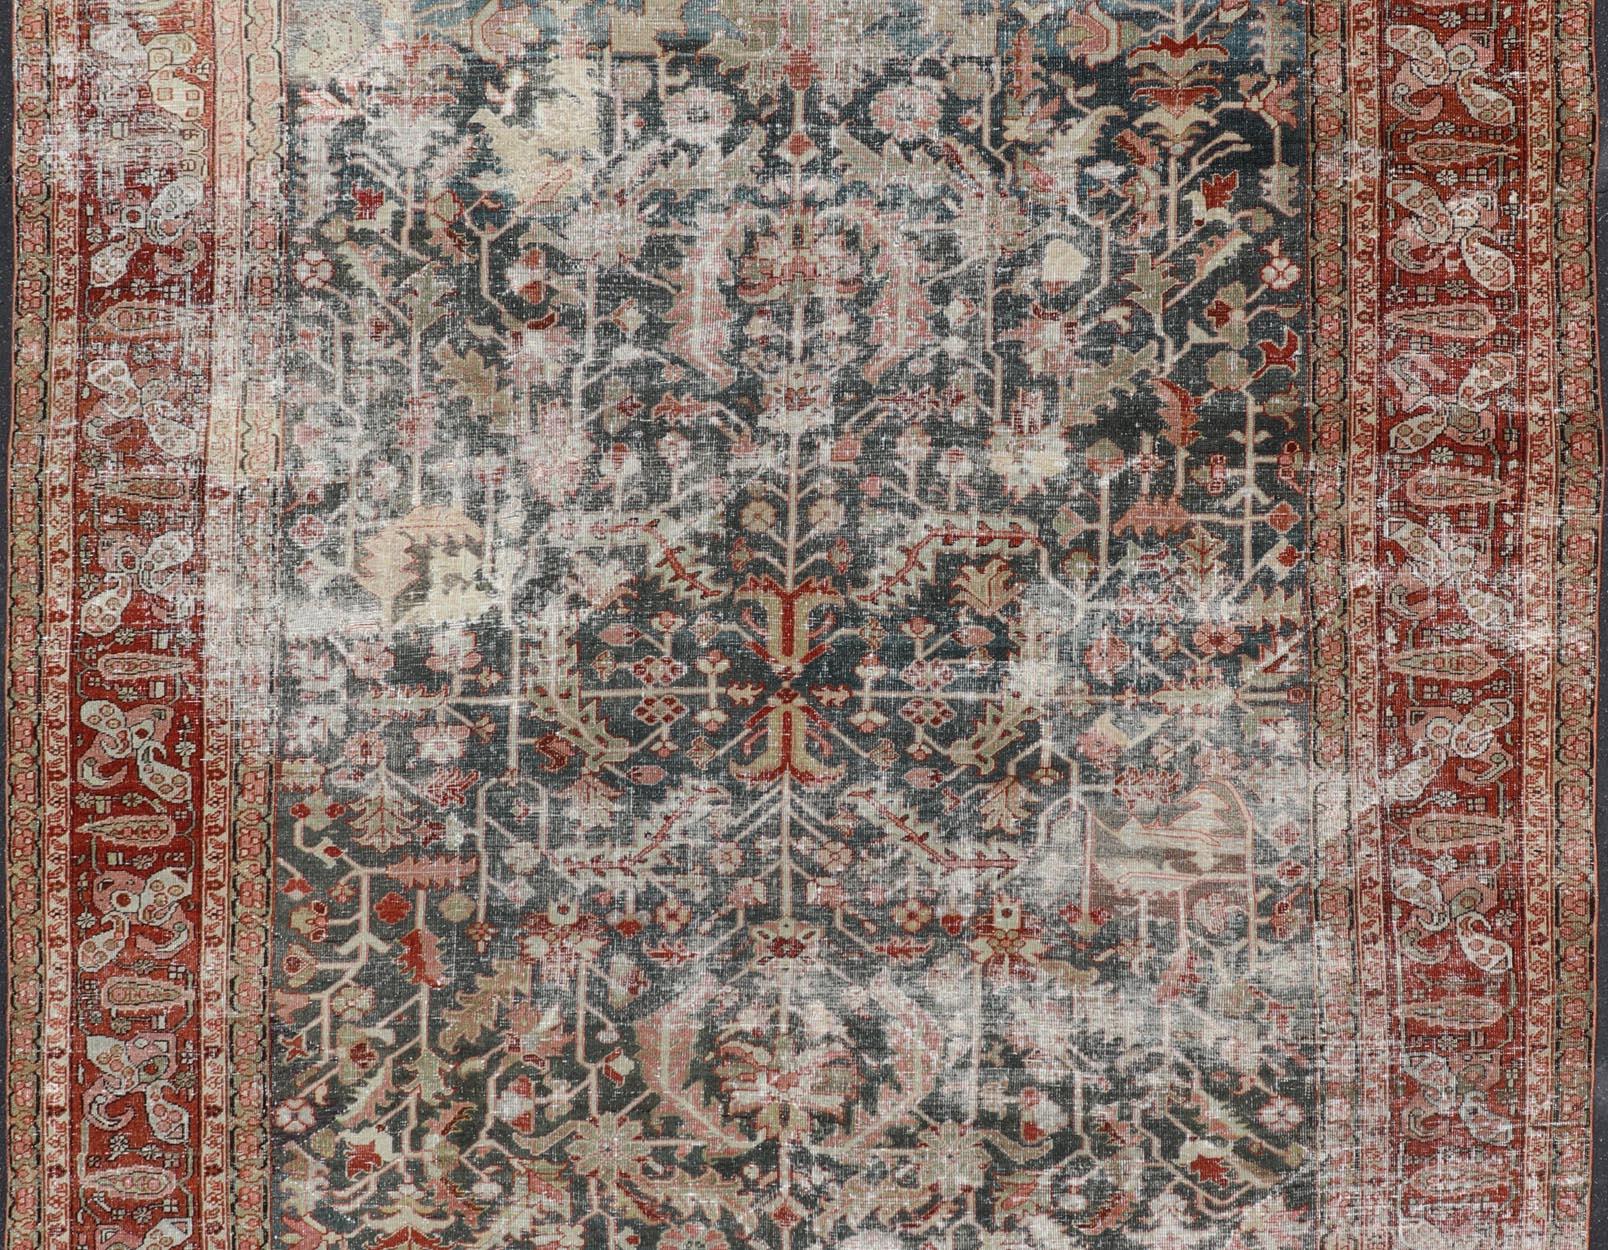 Persian Antique Heriz Rug with All-Over Geometric Design in Gray-Blue and Red  For Sale 3